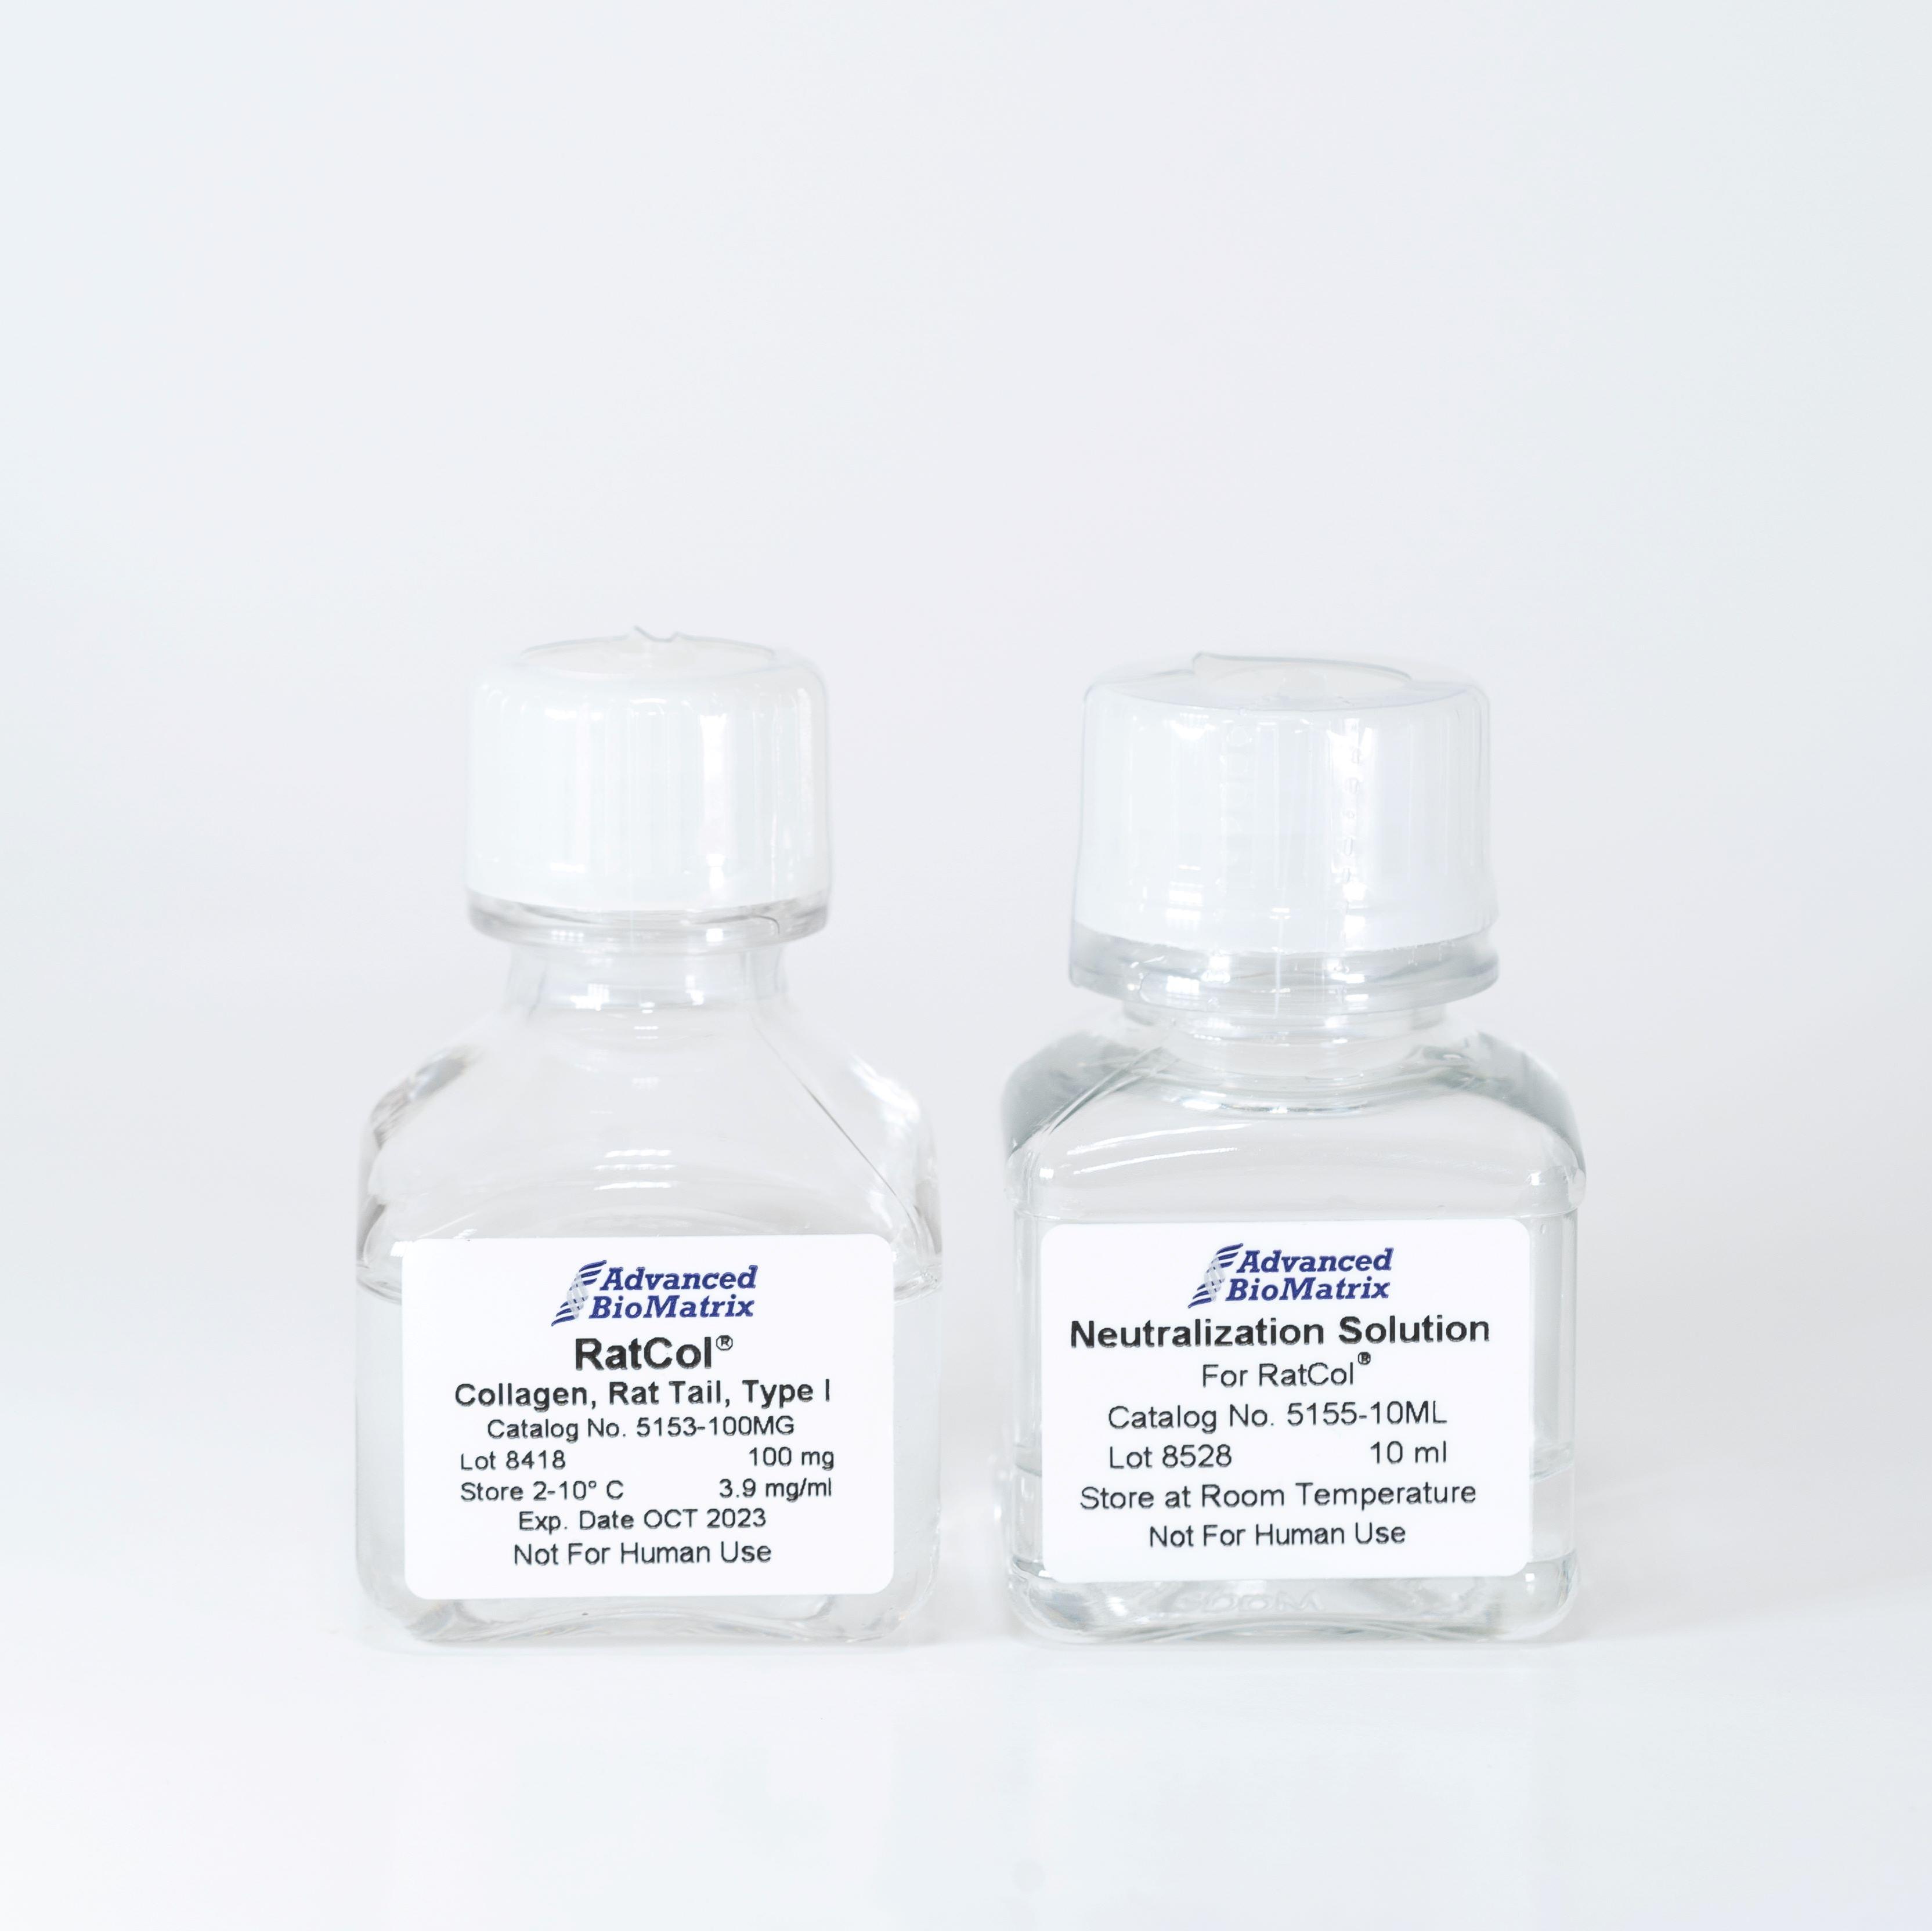 RatCol type I rat tail collagen from advanced biomatrix